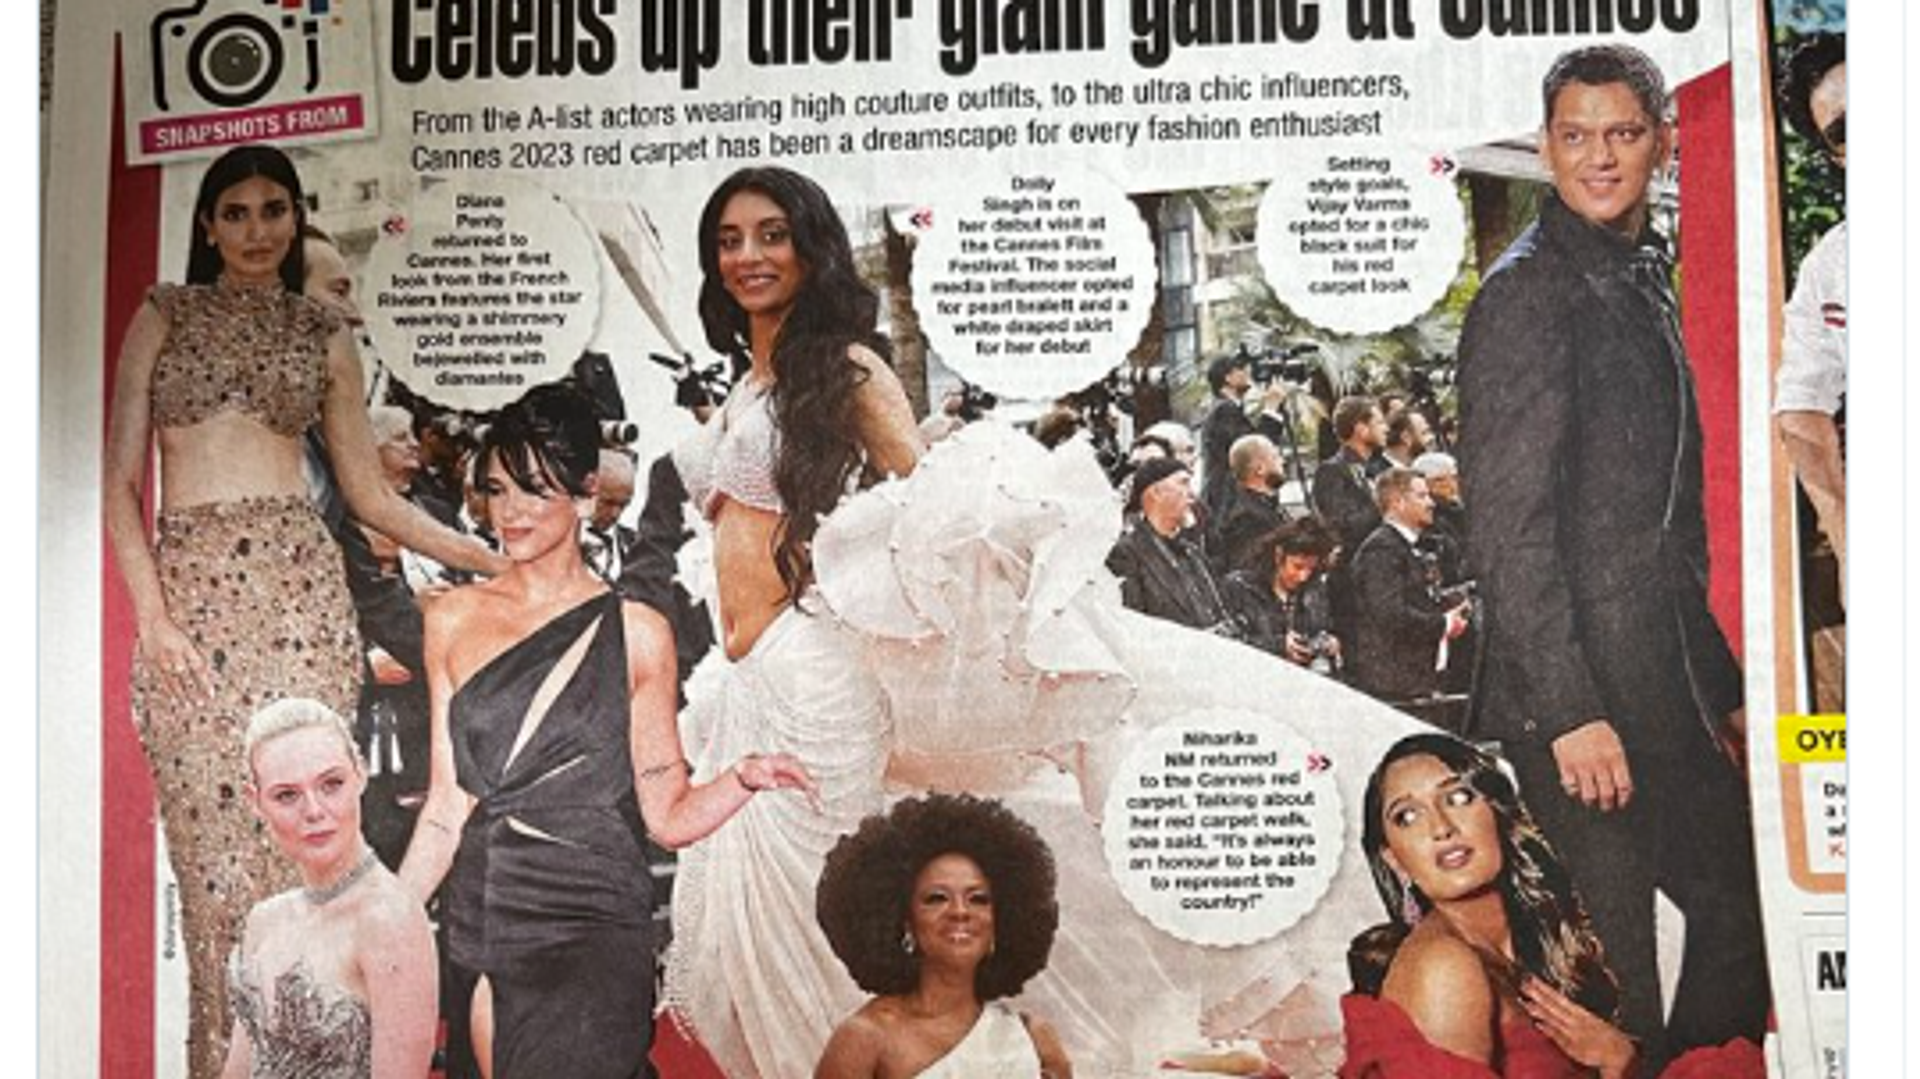 15 times Bollywood divas rocked Cannes in couture. On Fashion Friday -  India Today